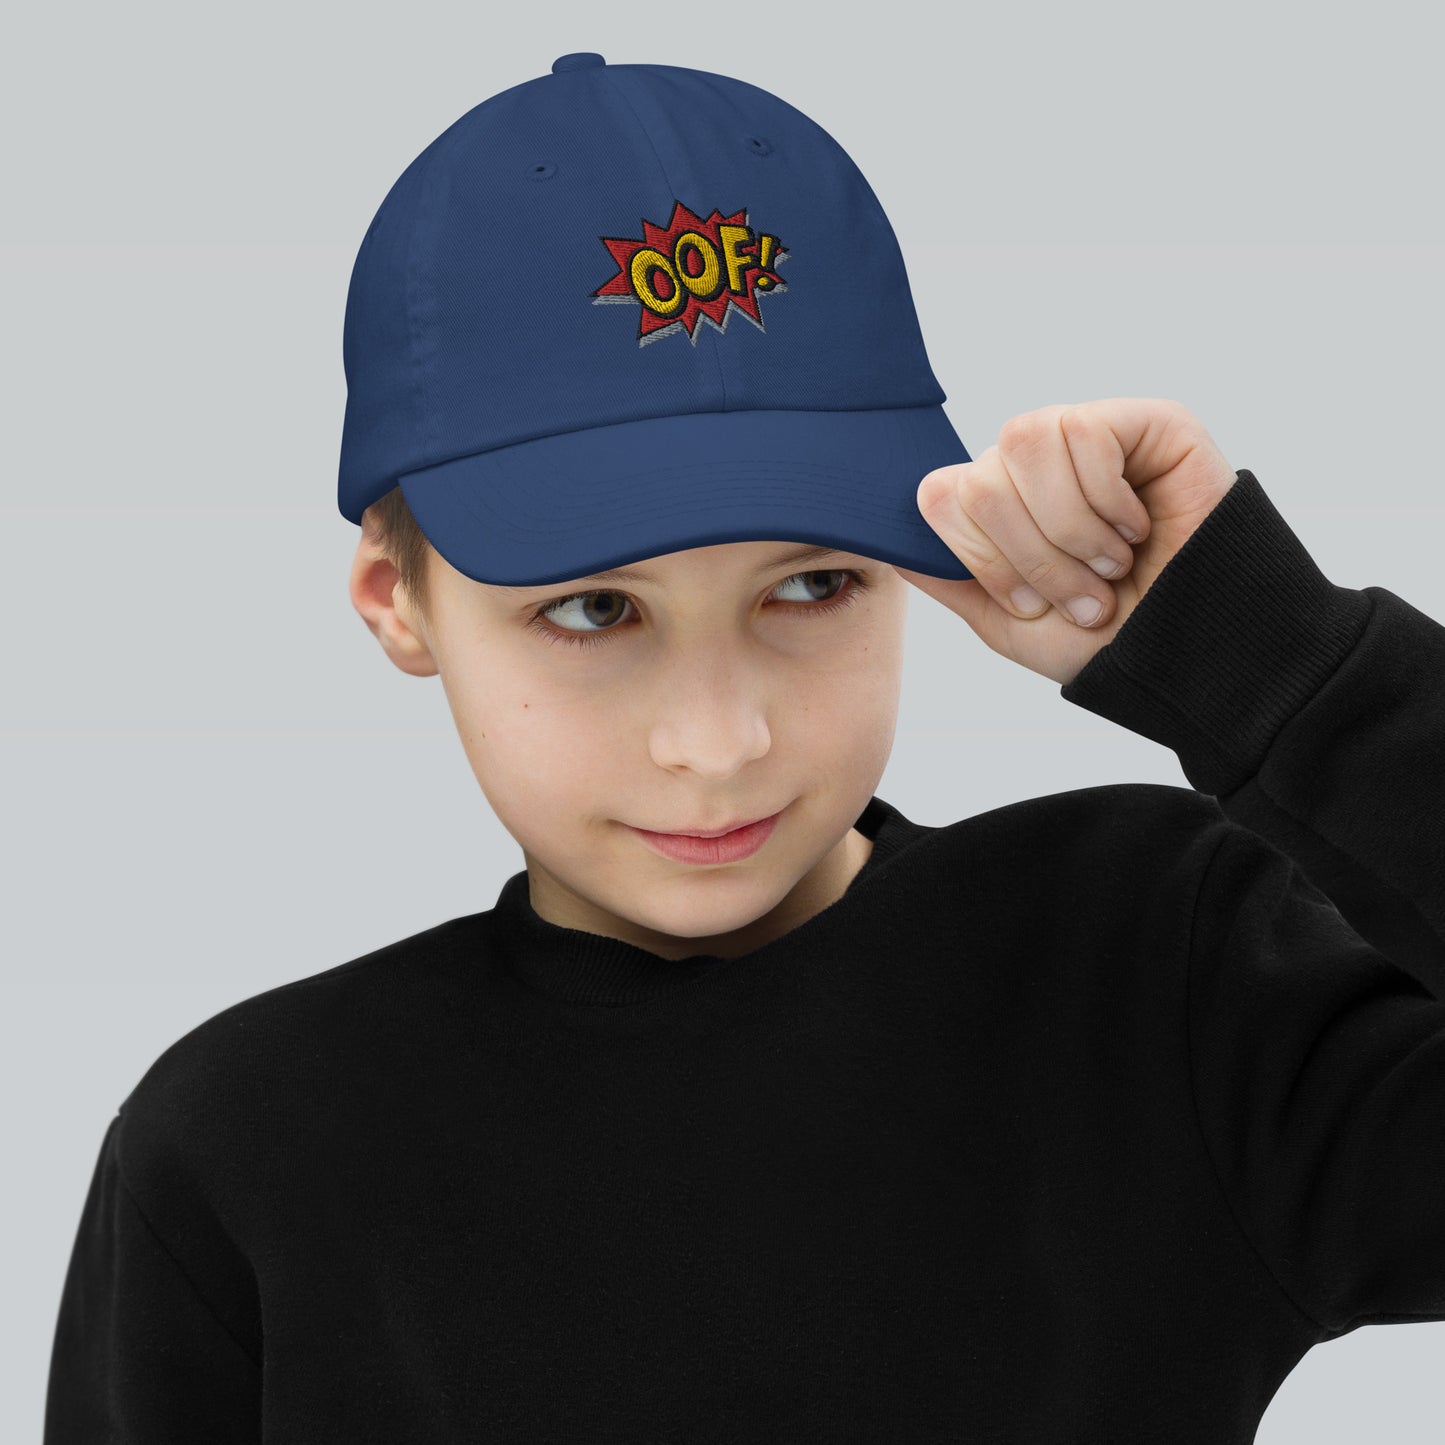 OOF! - Official Logo YOUTH Baseball Cap (4 colors)